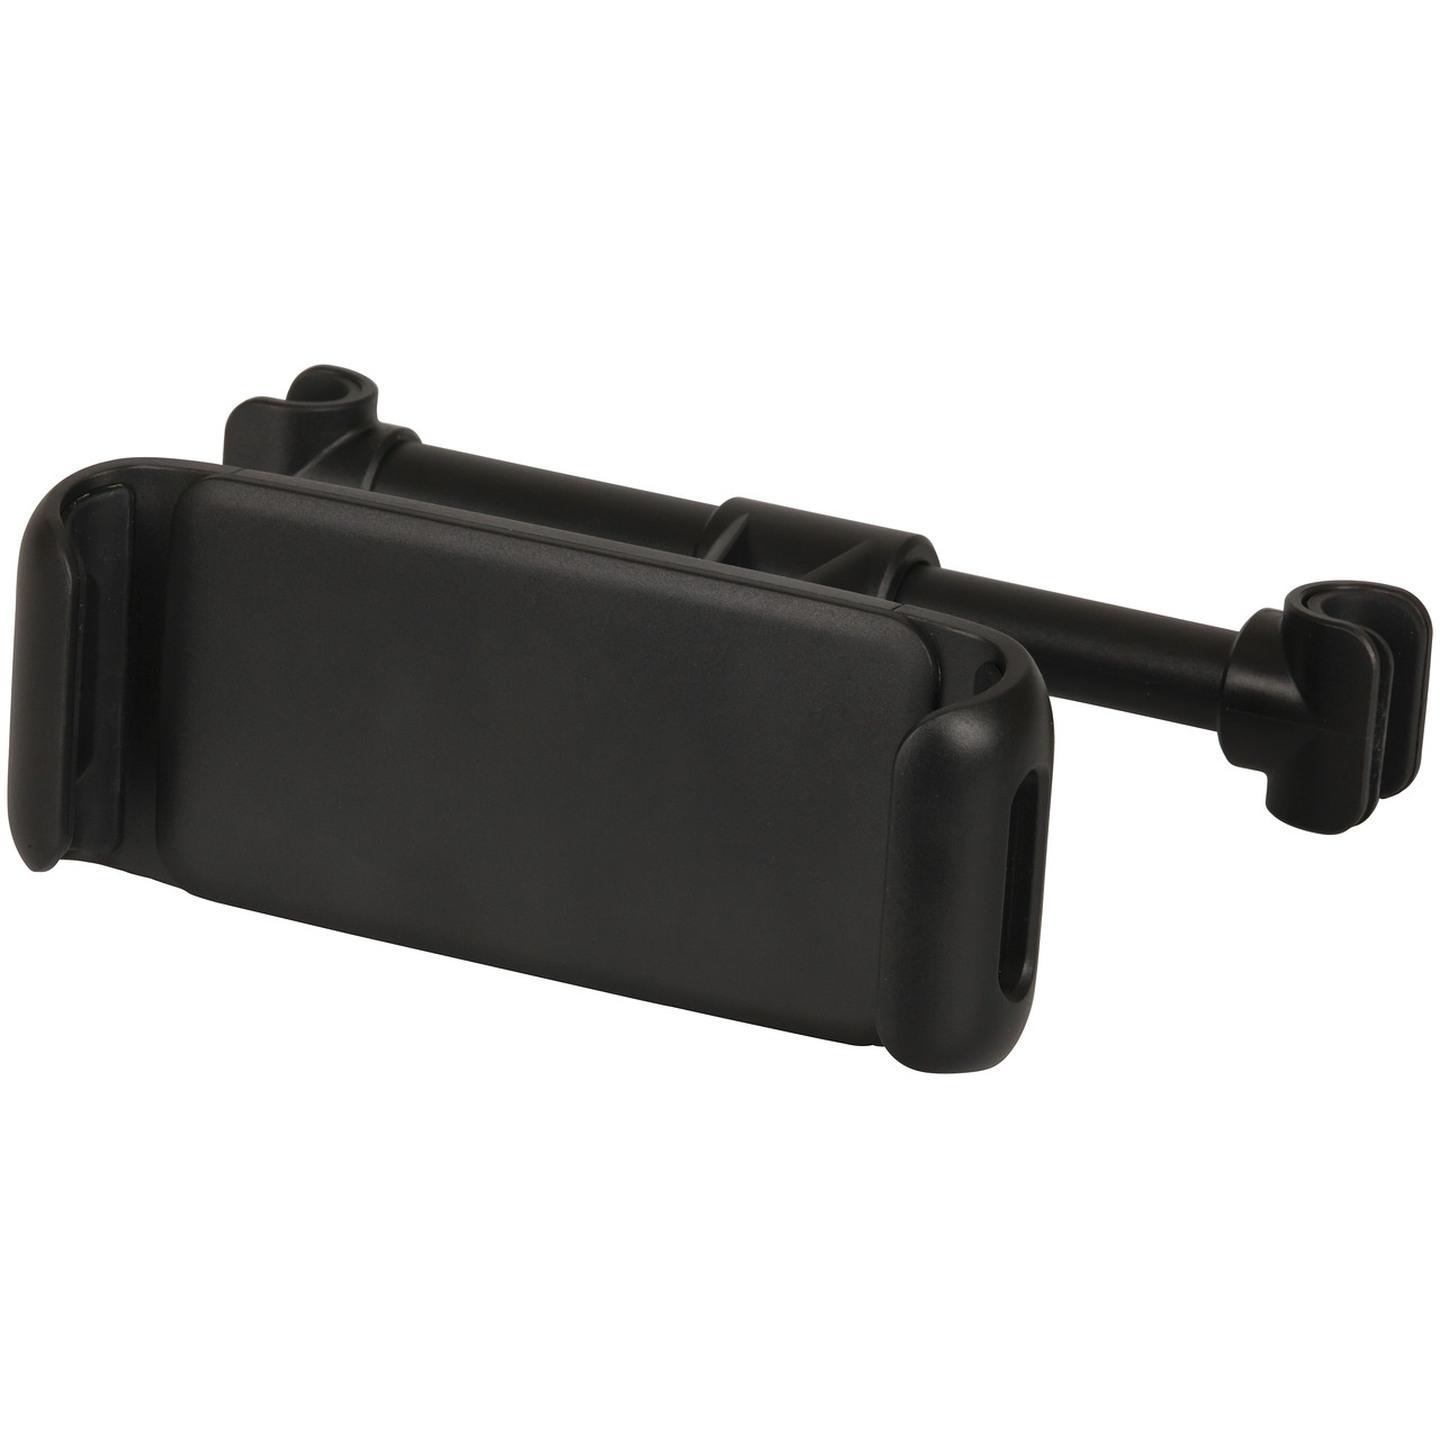 Universal Tablet and Phone Headrest Mount